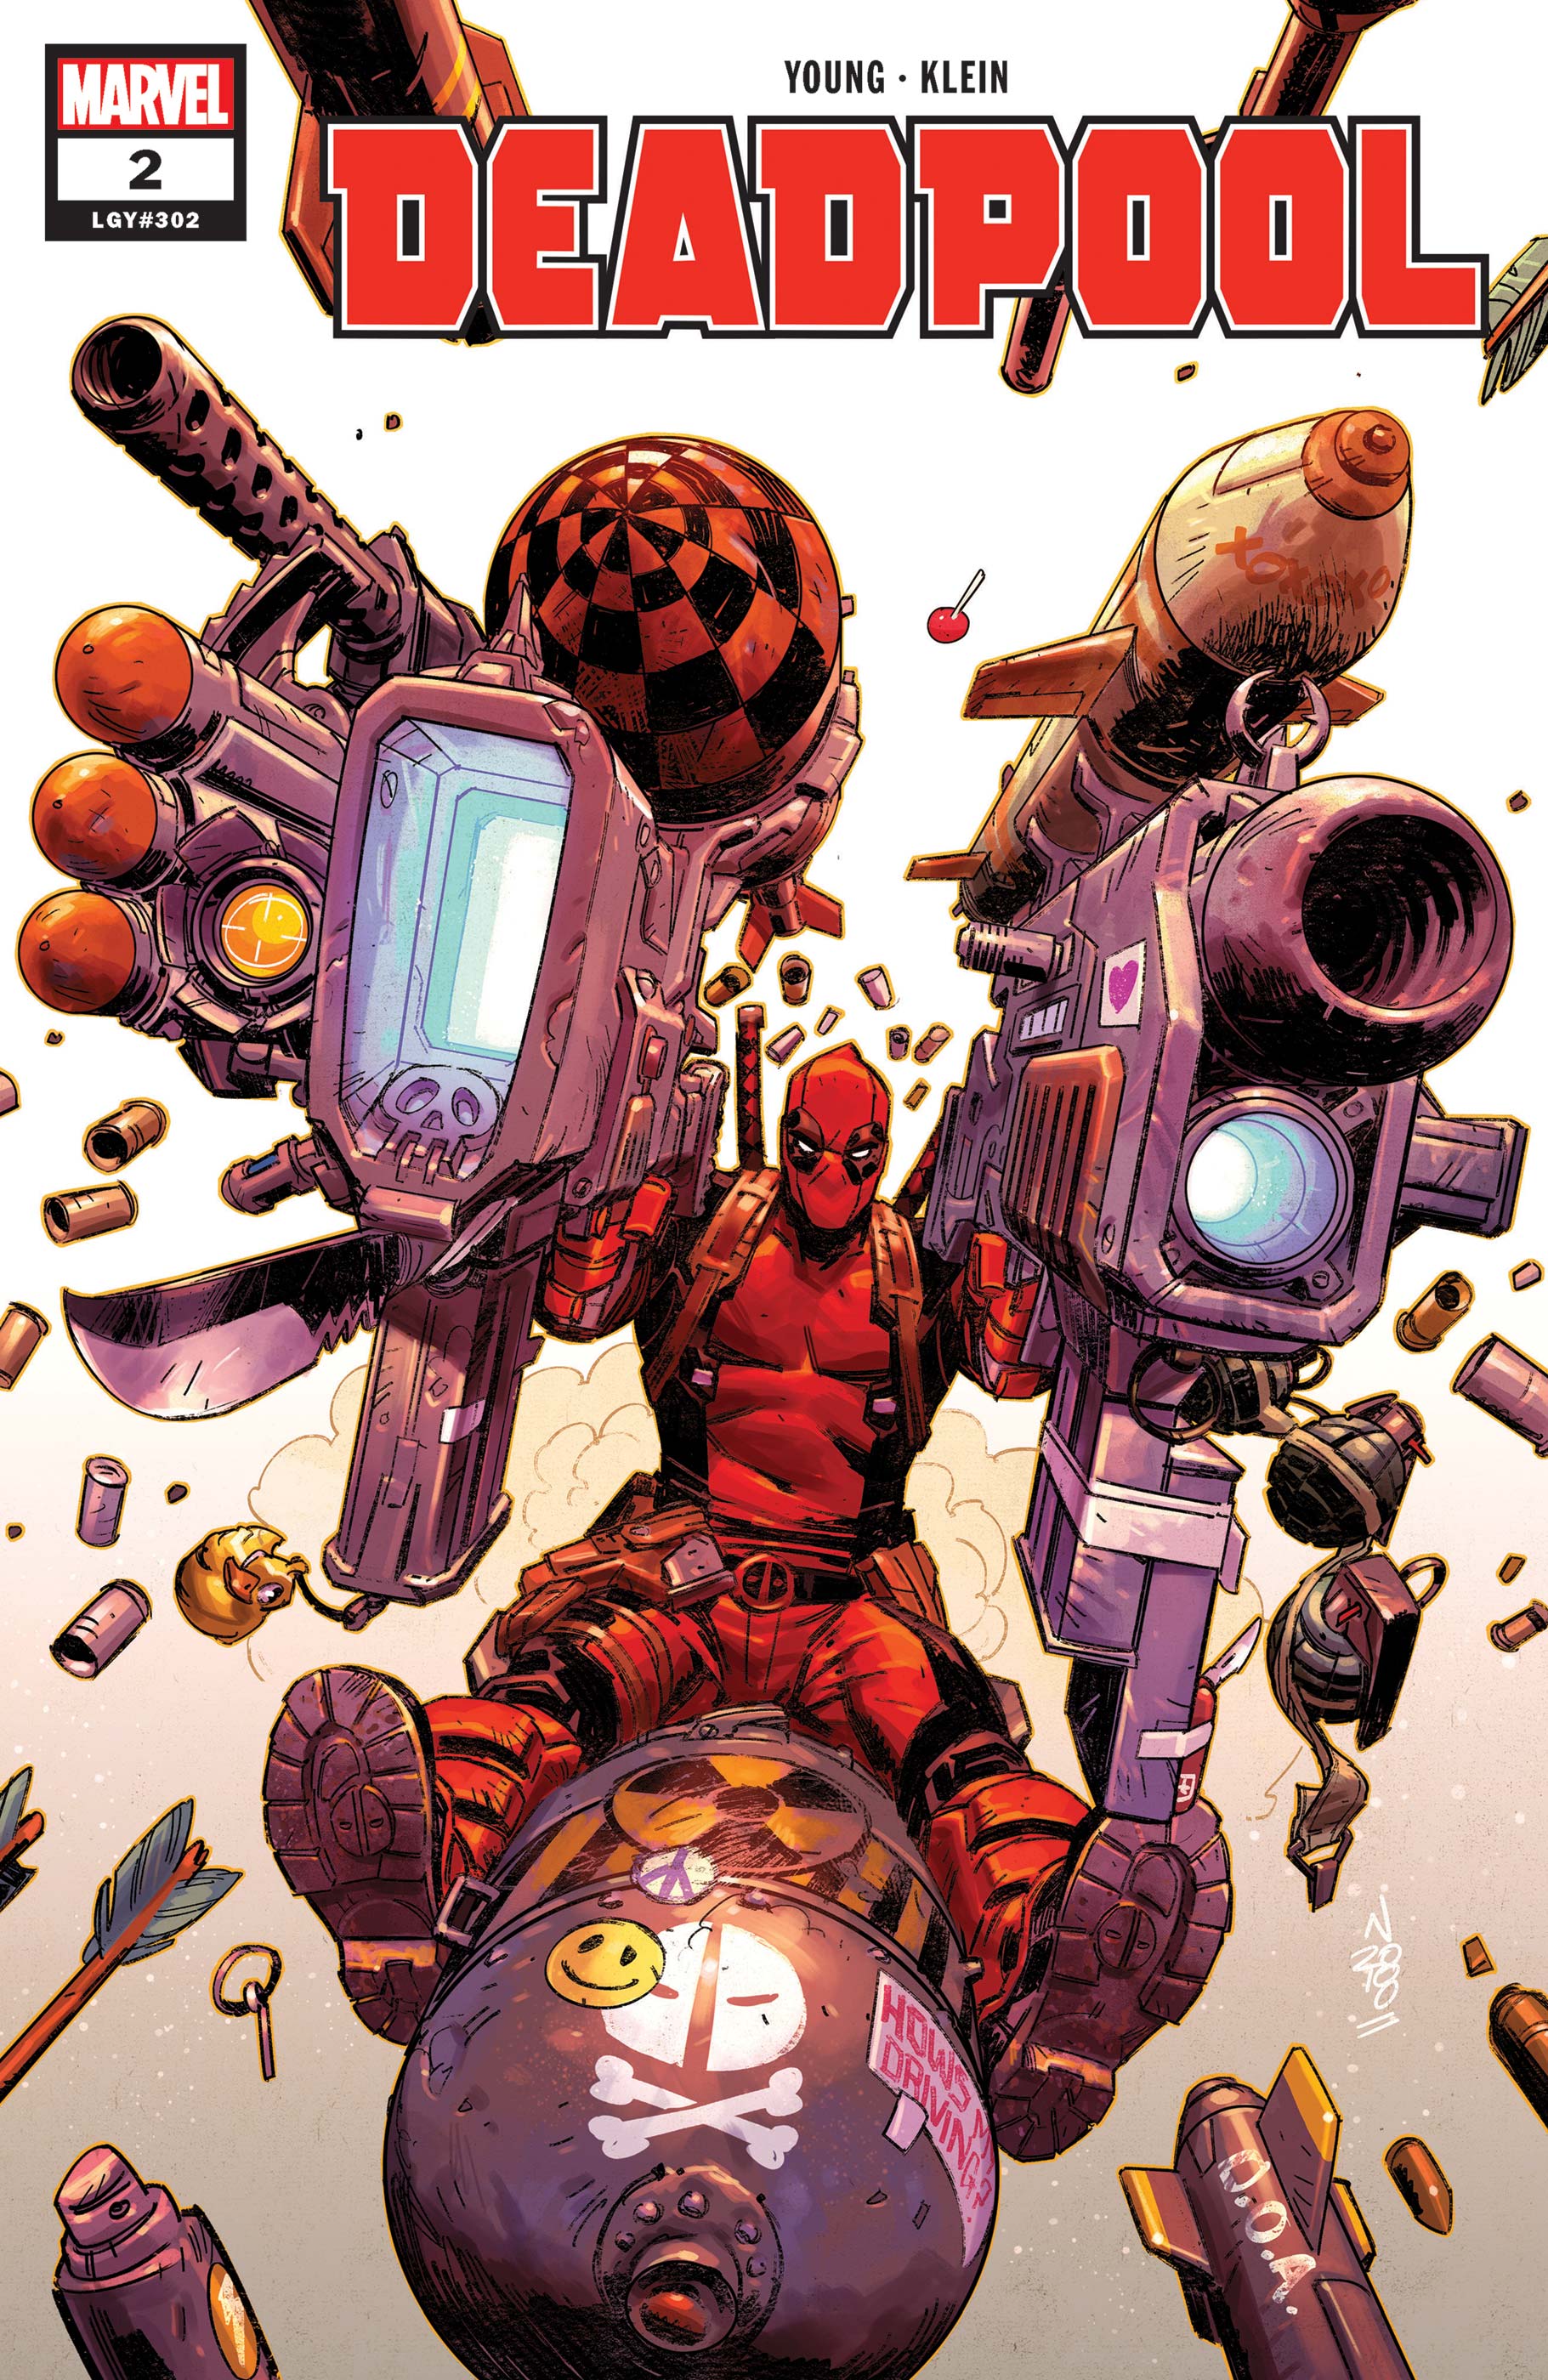 Despicable Deadpool Vol. 2: Bucket List (Trade Paperback), Comic Issues, Comic Books